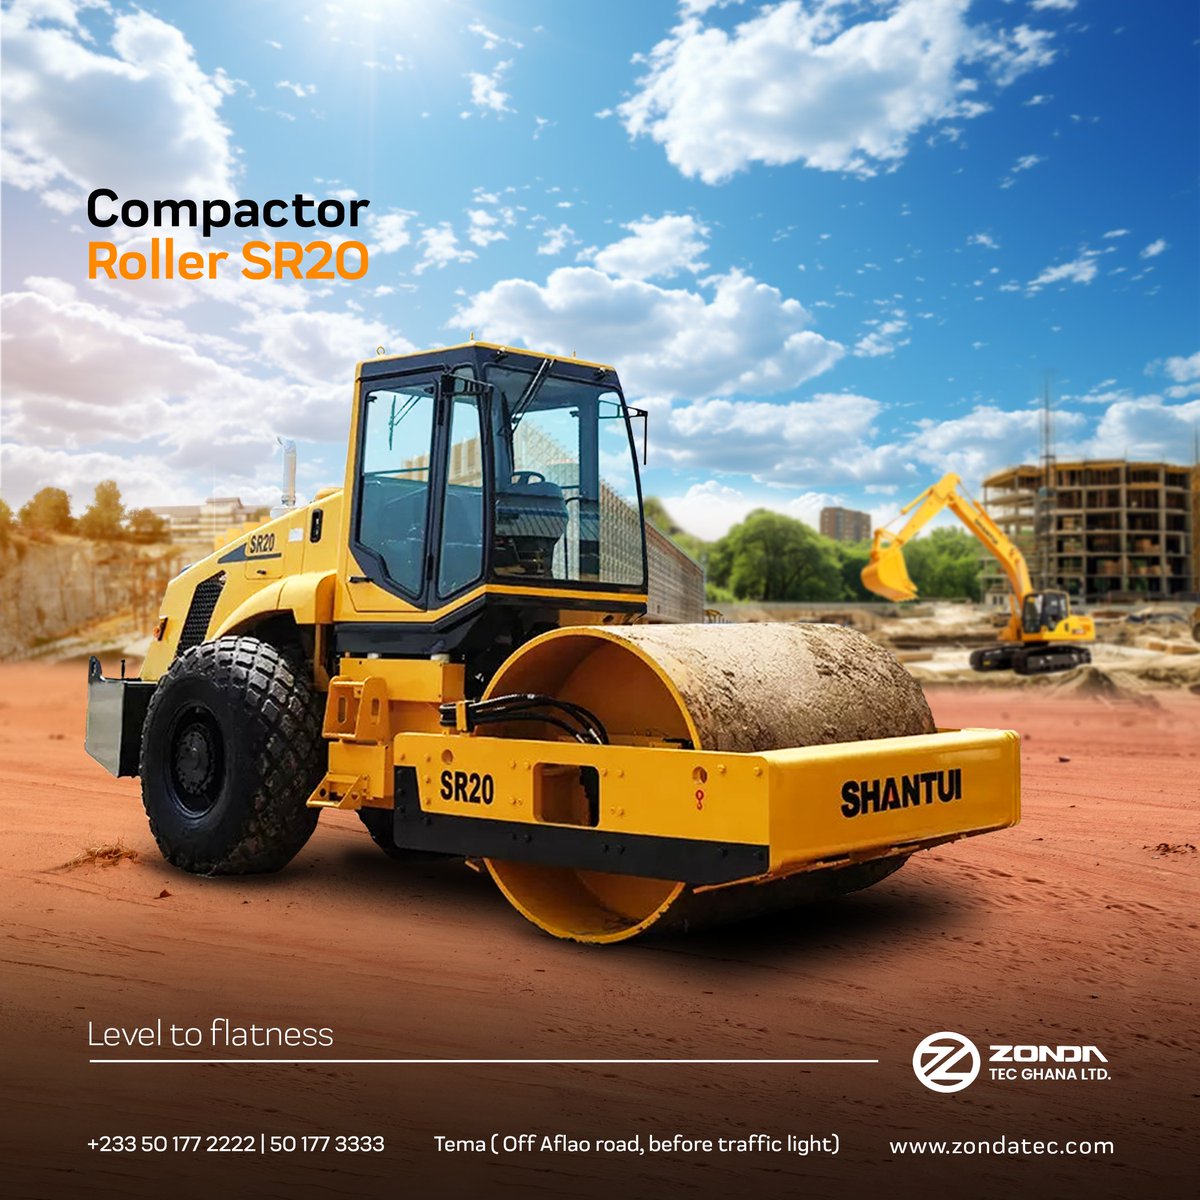 Precision at its finest with the SR20 compactor roller for that perfect flat finish!  #constructionlife #SR20 #levelground #construction #constructionlife #constructionequipment #ConstructionExcellence